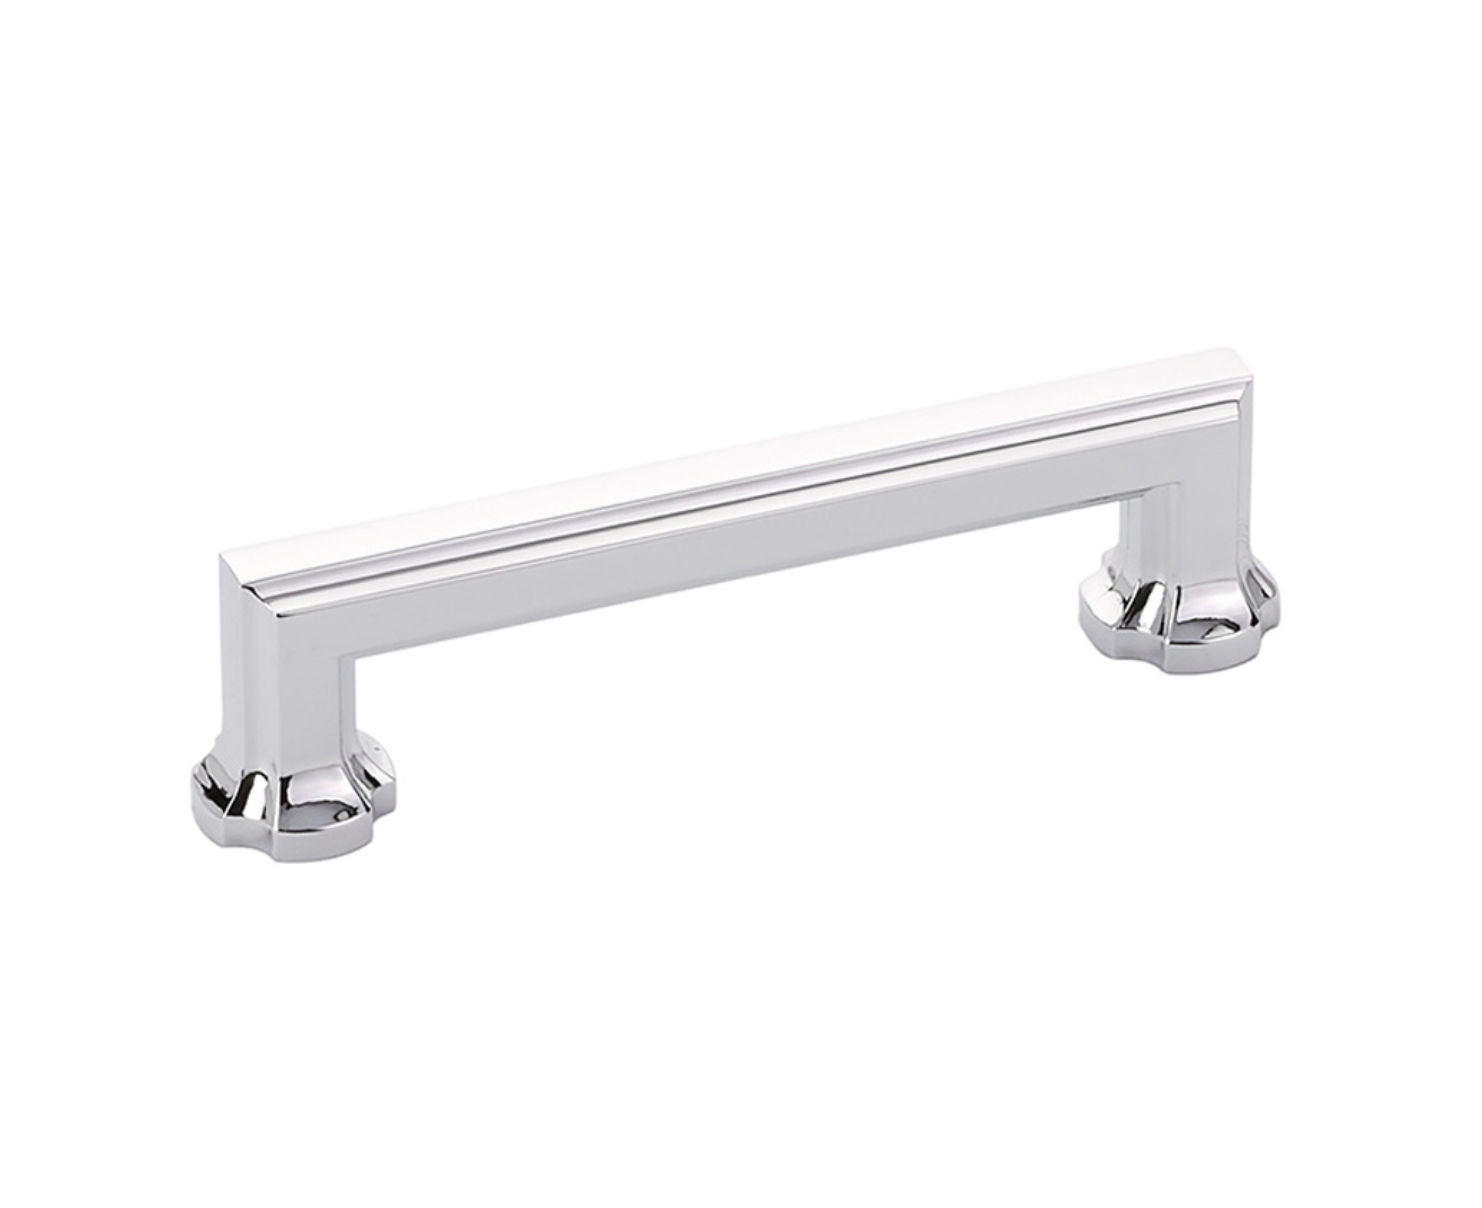 Polished Chrome "Regal" Cabinet Knobs and Drawer Pulls - Industry Hardware